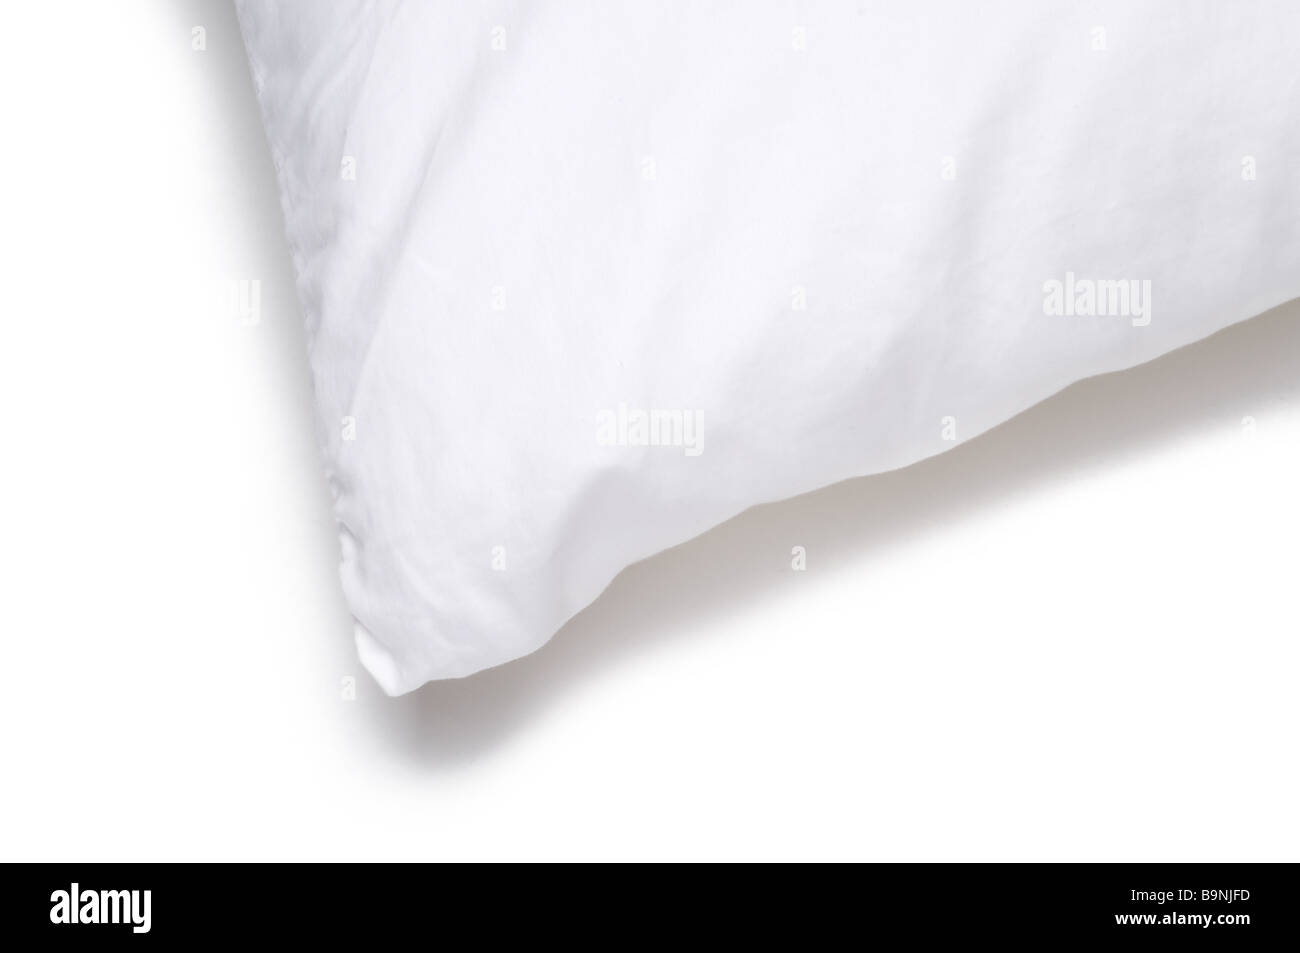 Corner edge of a white bed pillow on a white background Stock Photo